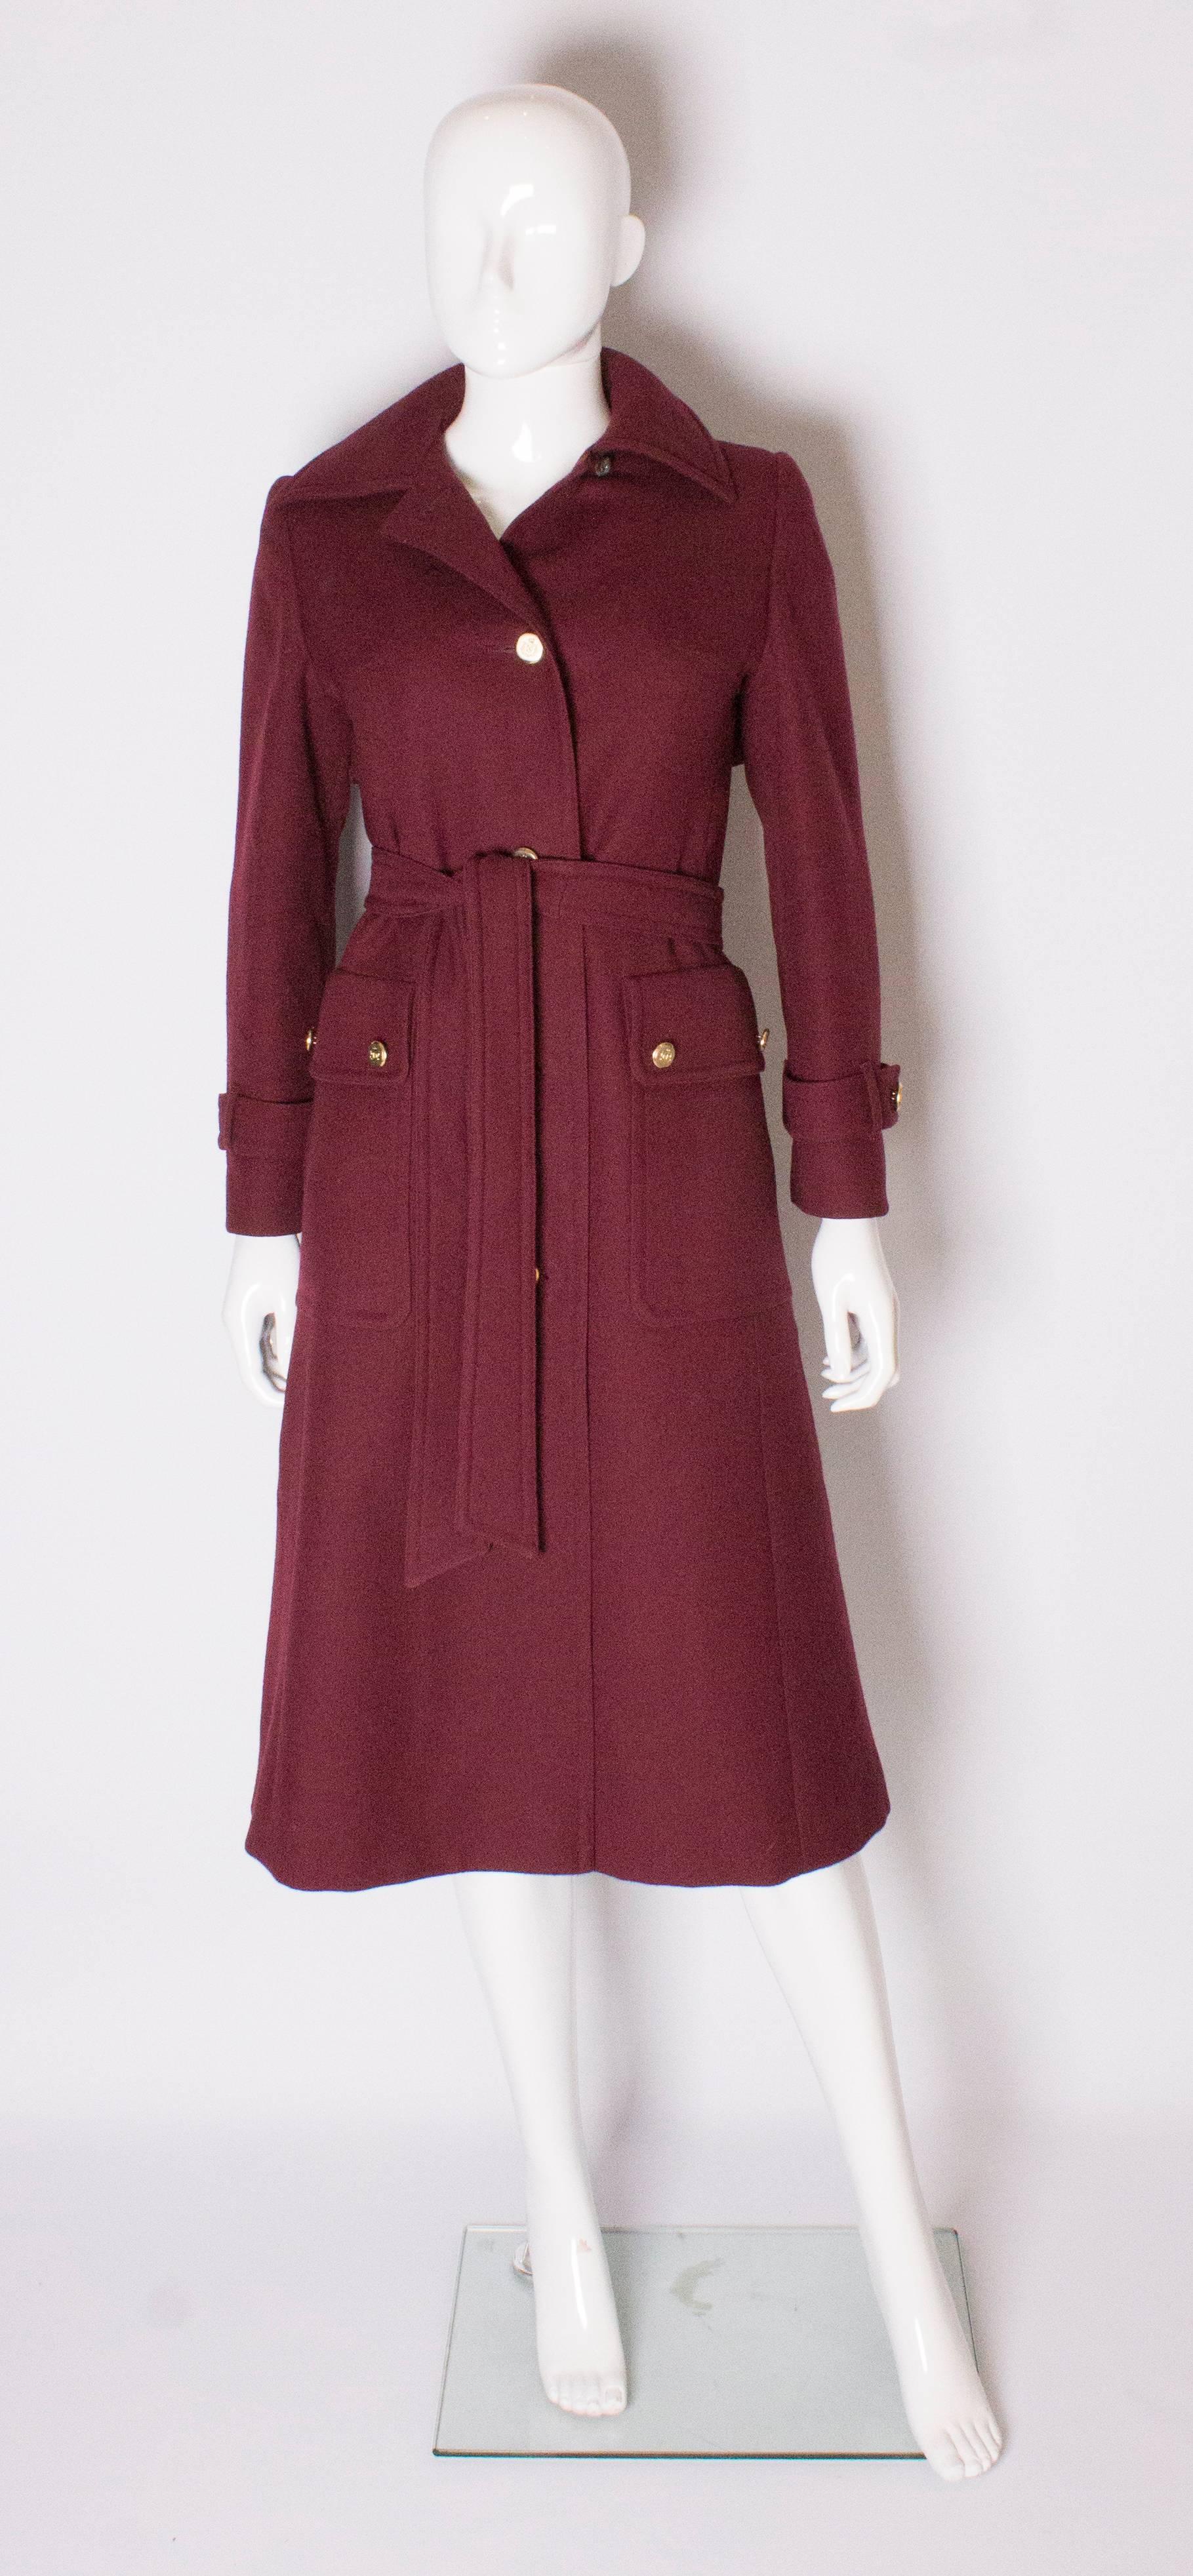 A great vintage coat for Autumn /Winter by Aquascutum for Harrods. In a burgundy colour wool, the coat has a 4 button opening , two large pockets on the front and a self tie belt. It is fully lined.